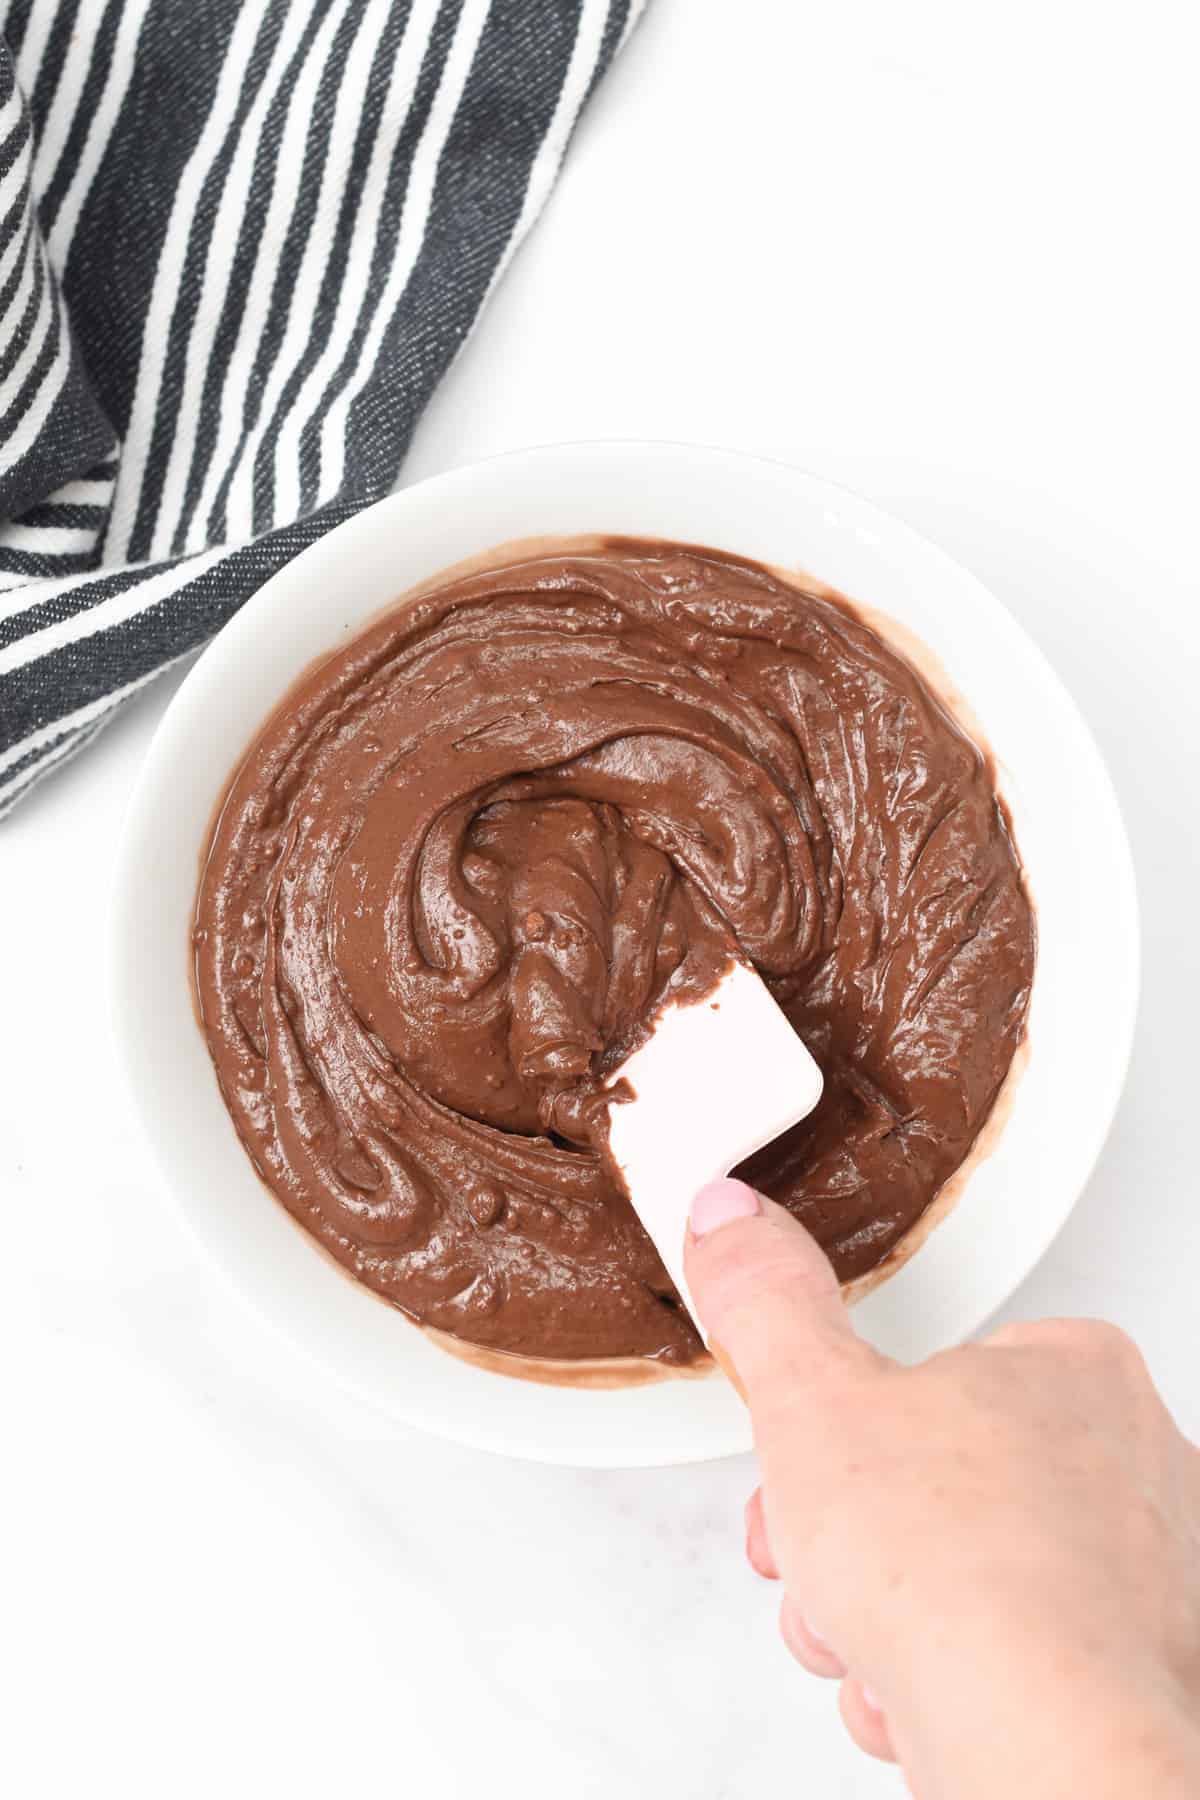 Protein Frosting